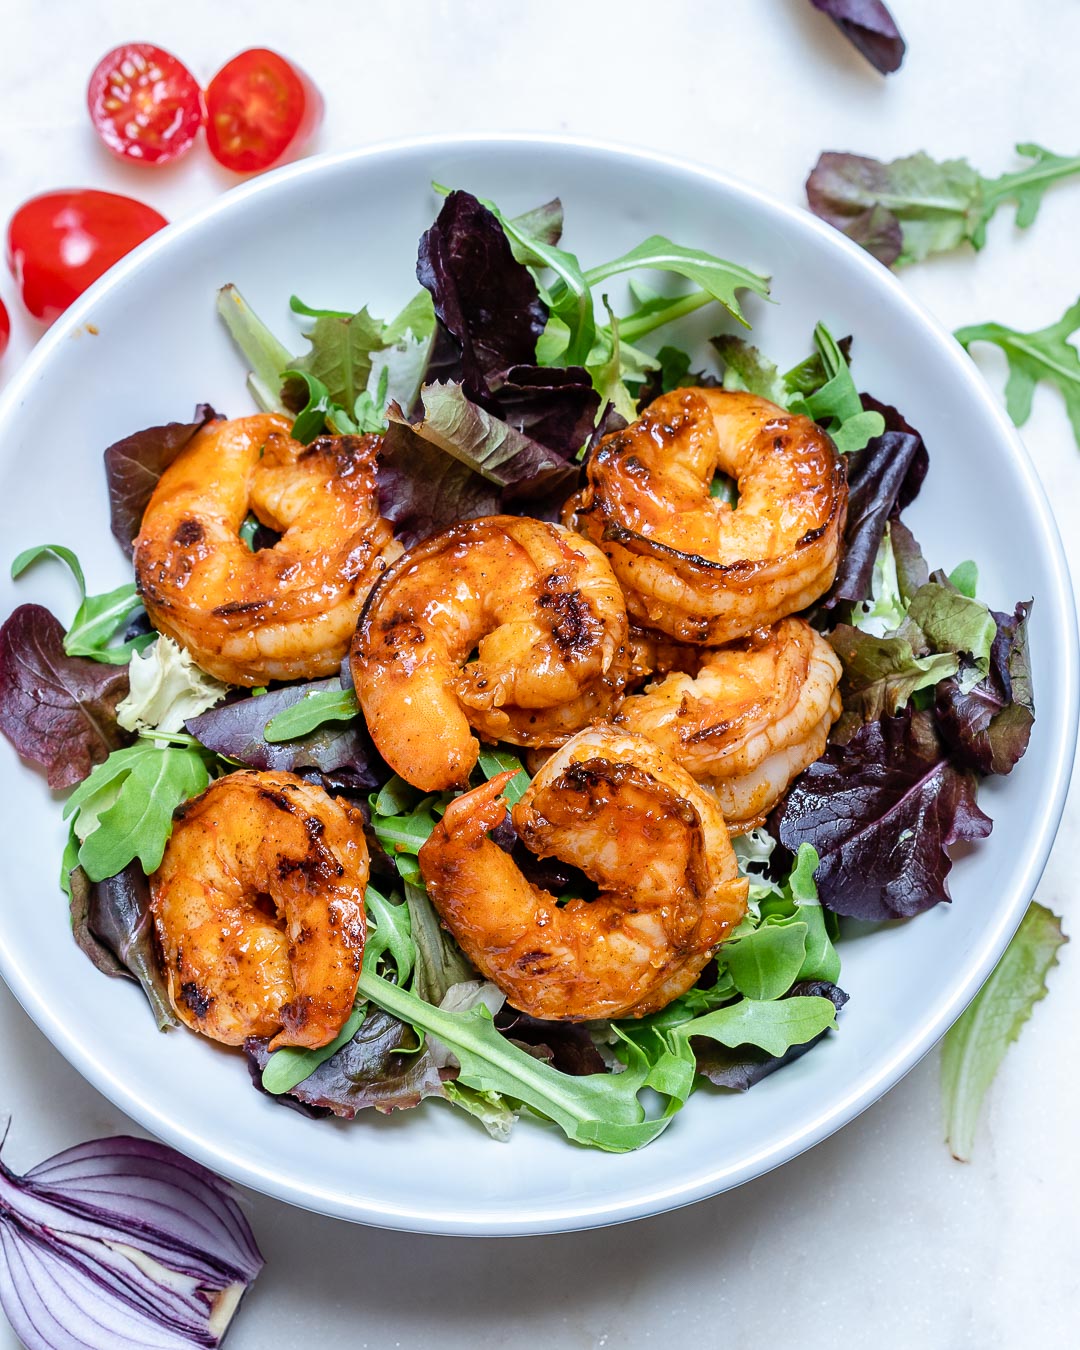 Grilled Shrimp Salad with Chili Lime Dressing - The Defined Dish